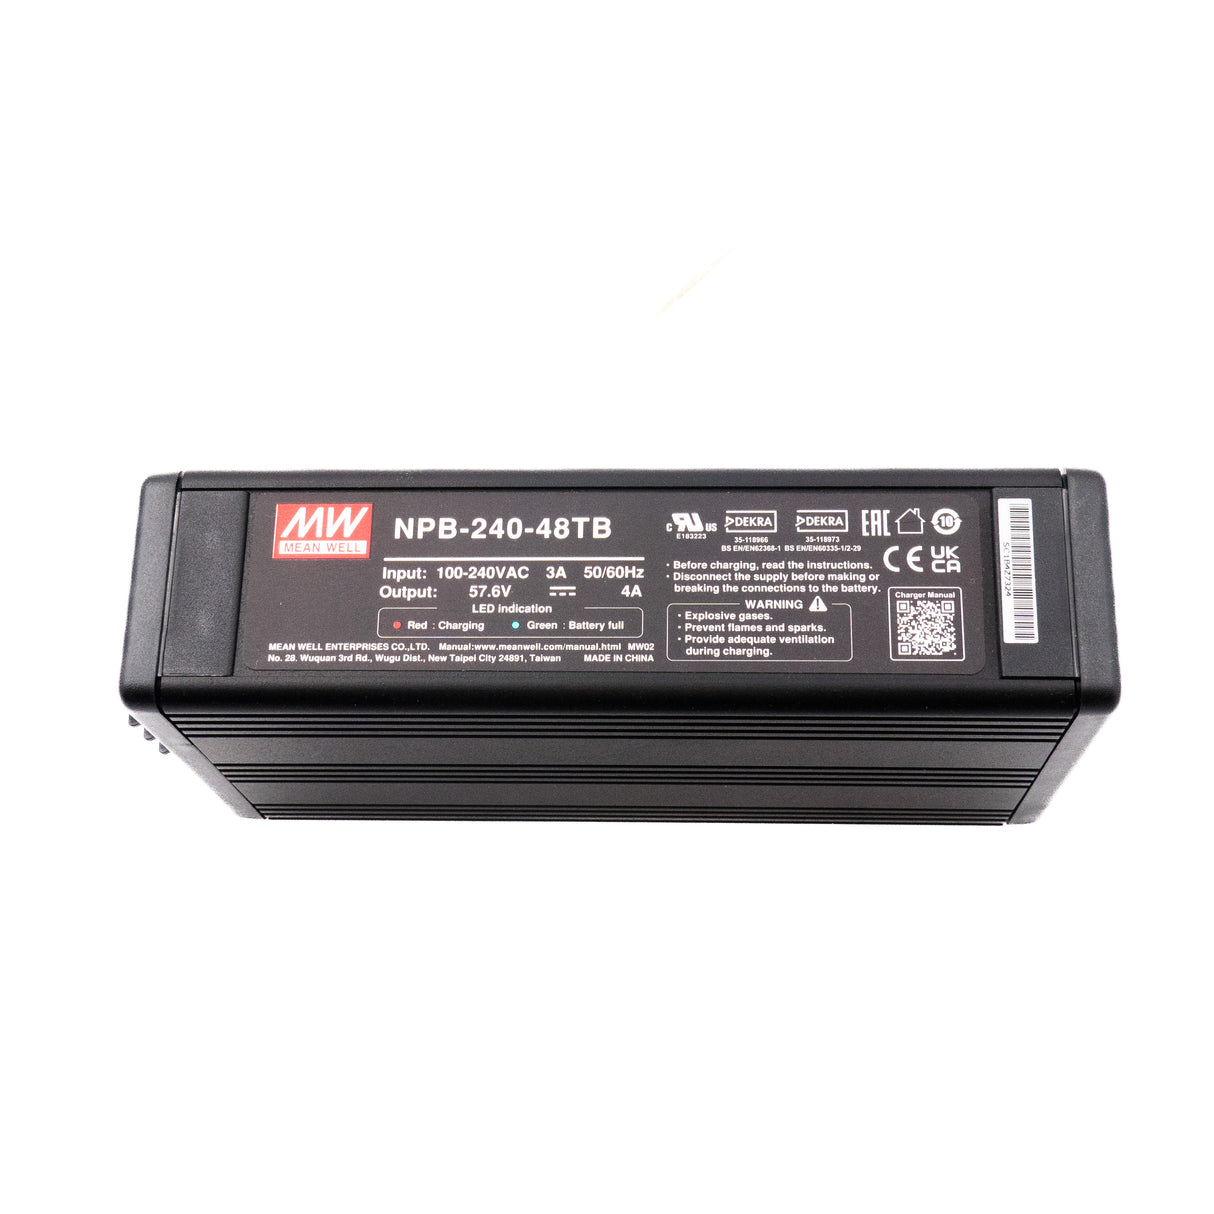 Mean Well NPB-240-12TB Battery Charger 240W 12V with Terminal Block - PHOTO 1